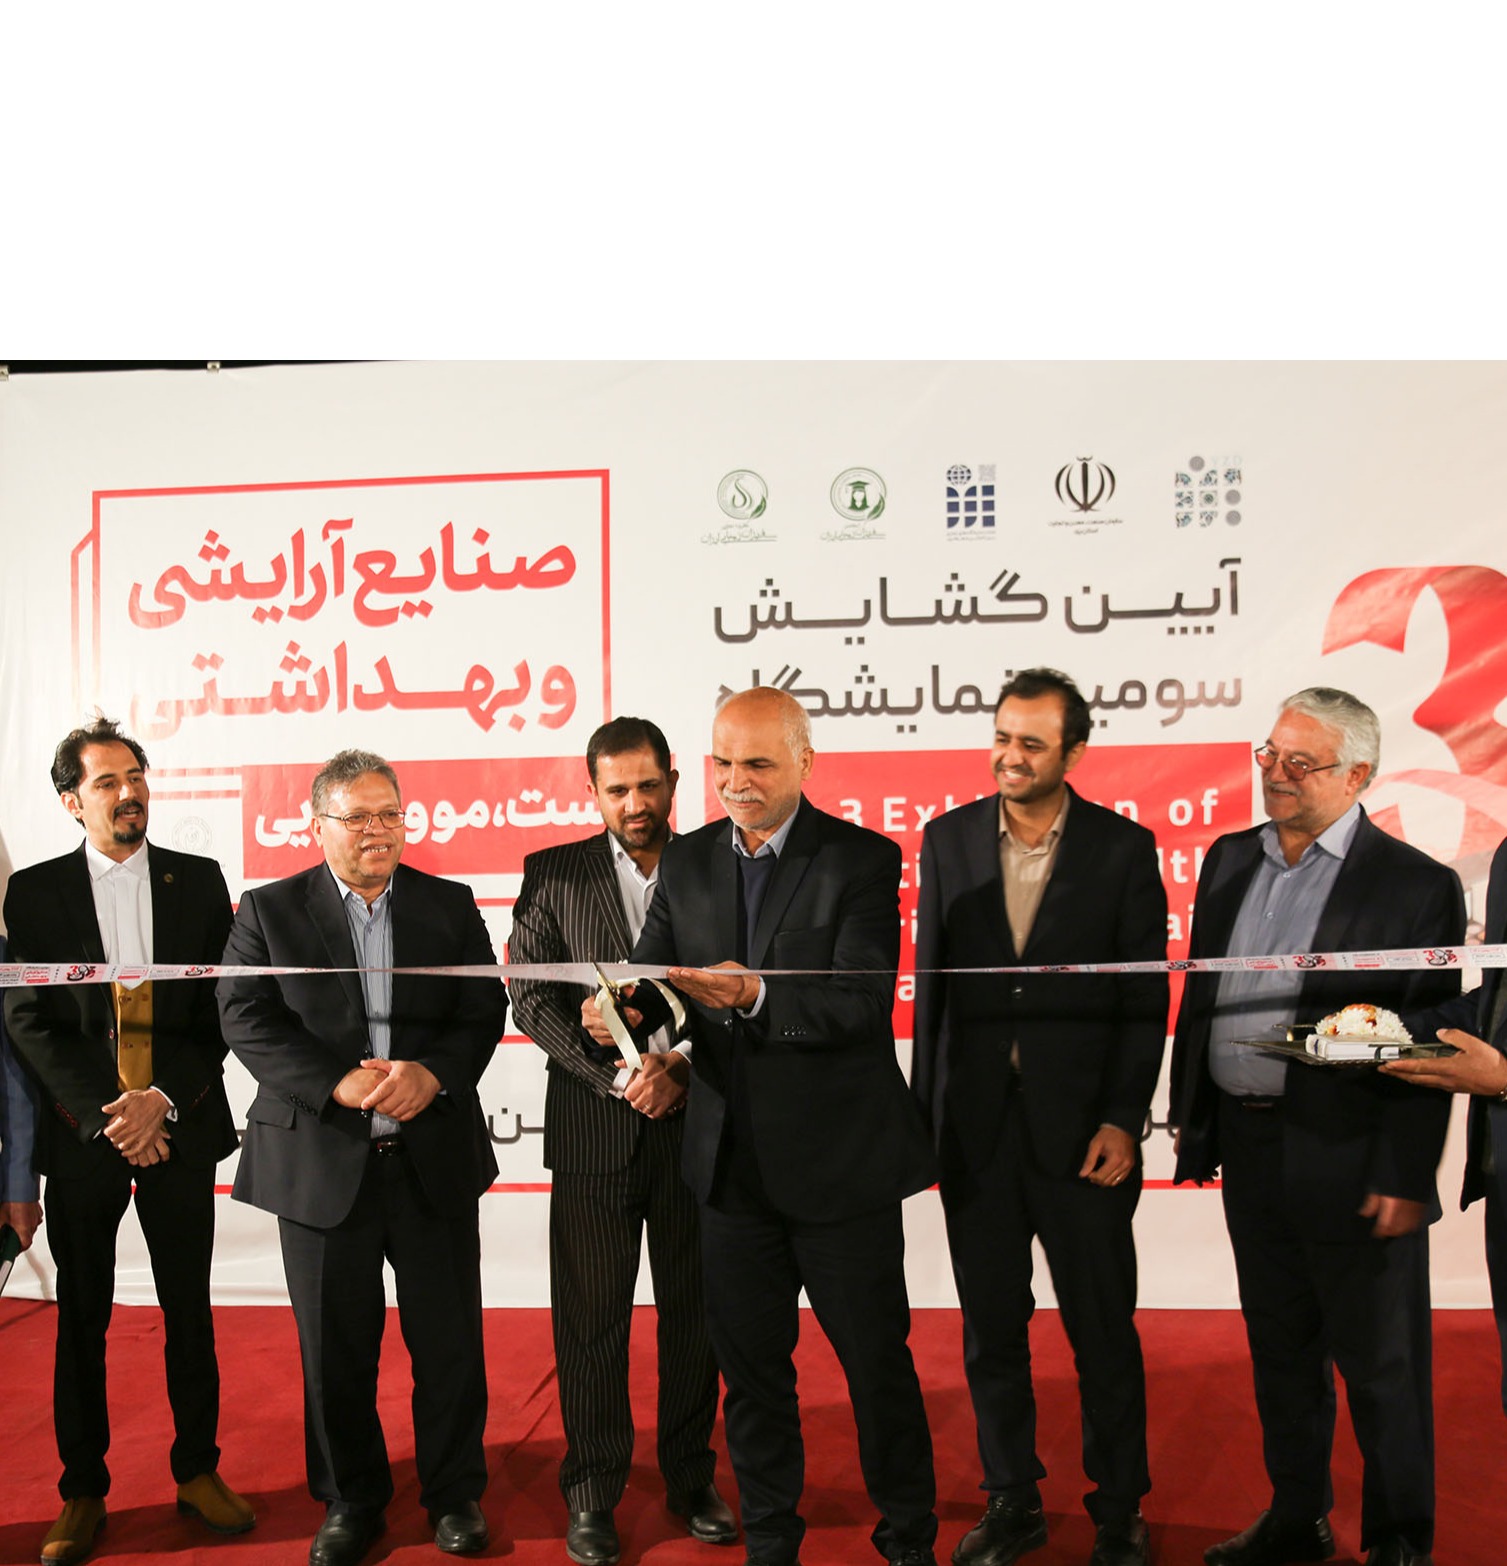 Opening of the exhibition of cosmetics and health industries in Yazd